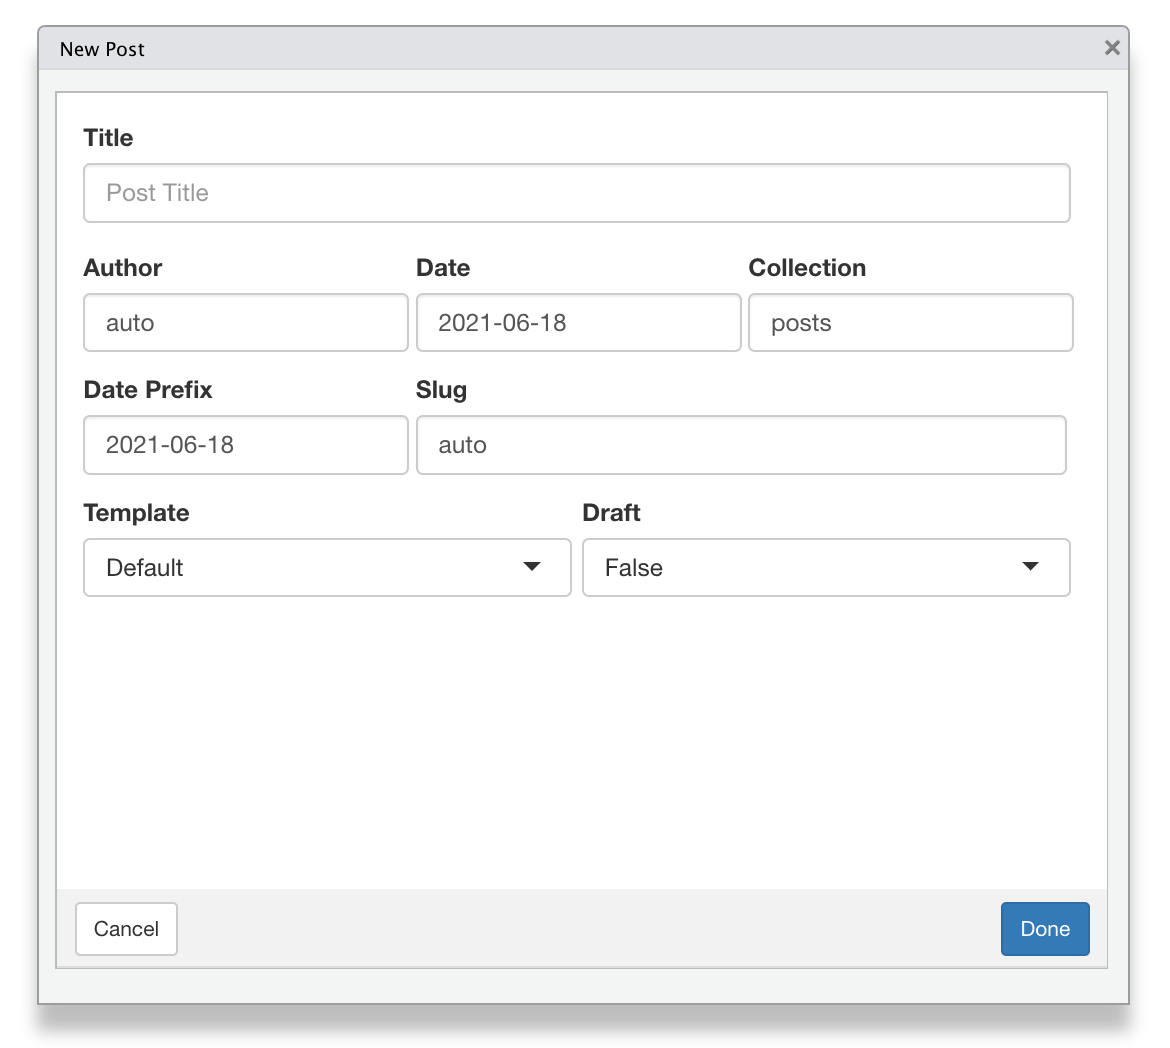 Preview of the new post from template RStudio addin for distilltools.